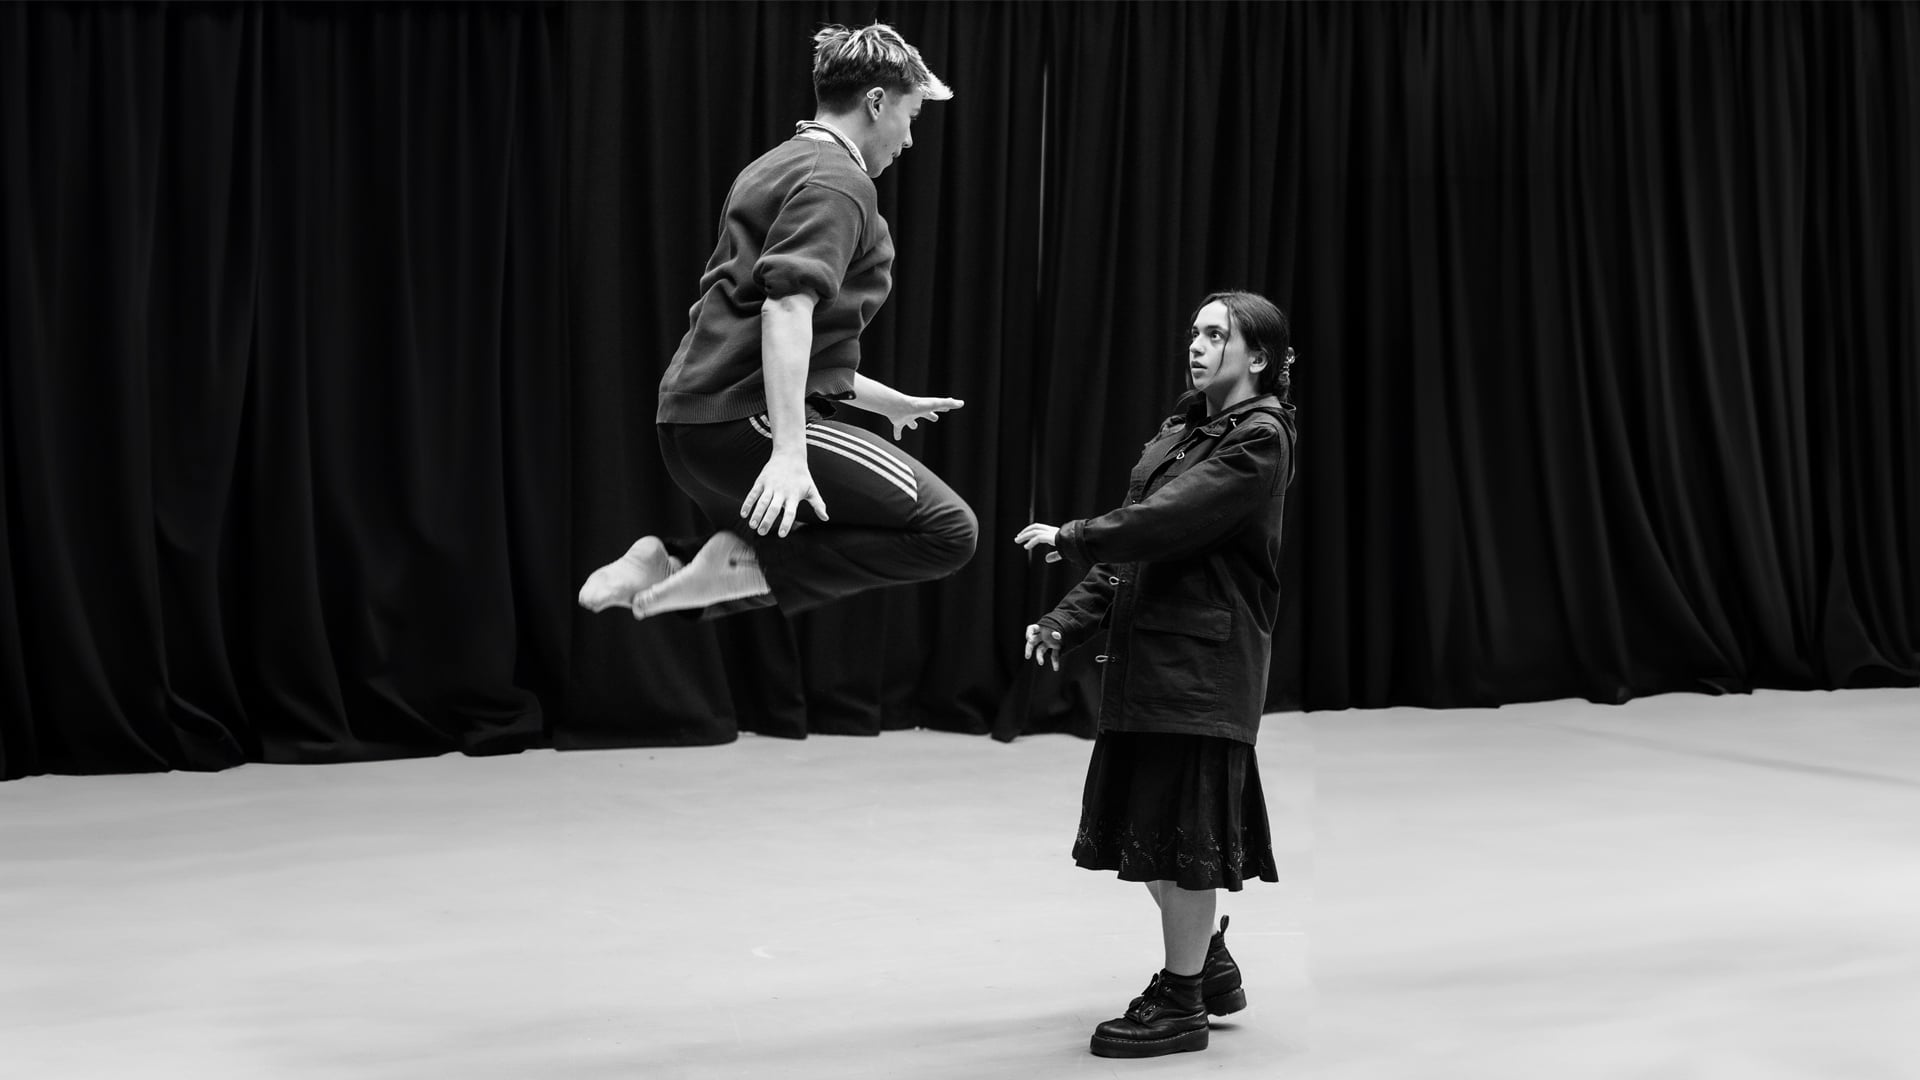 Alice rehearsal photo: monochrome; a young person dressed in a black midi-skirt and long dark jacket looks shocked as another young actor, wearing a striped tracksuit, jumps into the air in front of her.